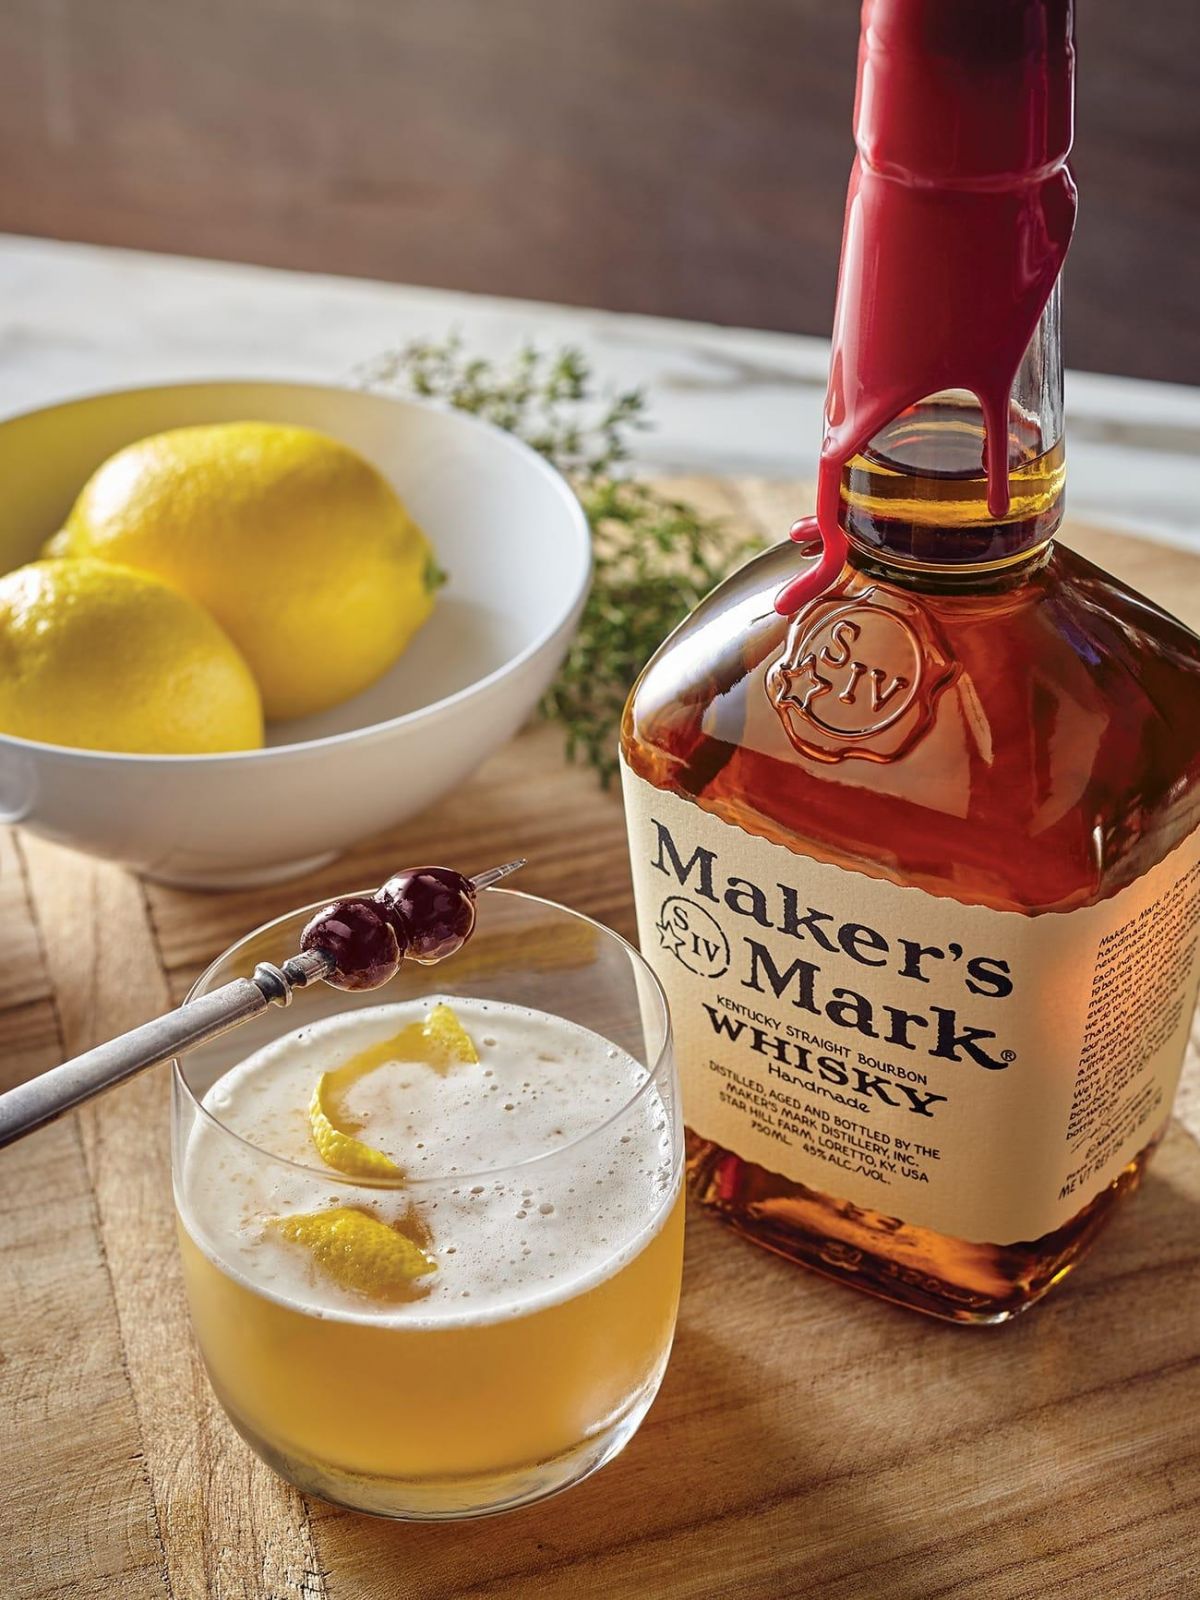 The Best Whiskey Sour Recipe Using Makers Mark - KY Supply Co